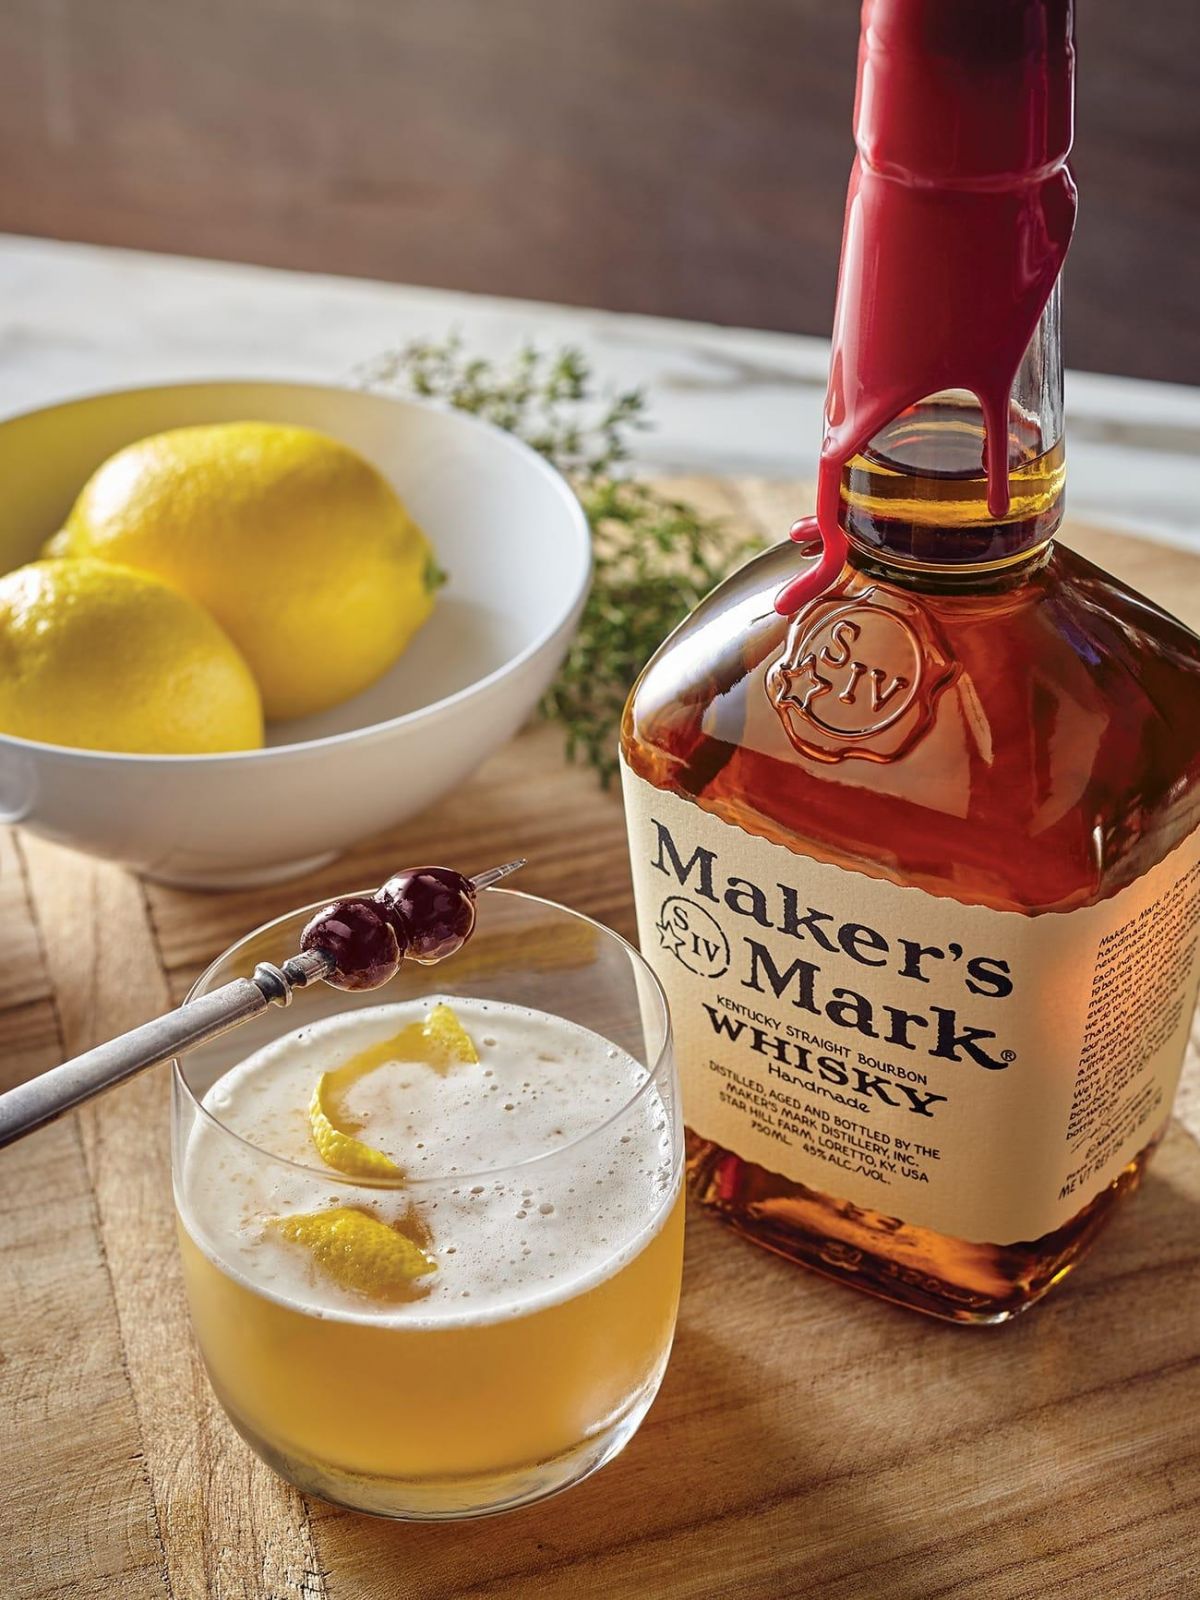 The Best Whiskey Sour Recipe Using Makers Mark - KY Supply Co